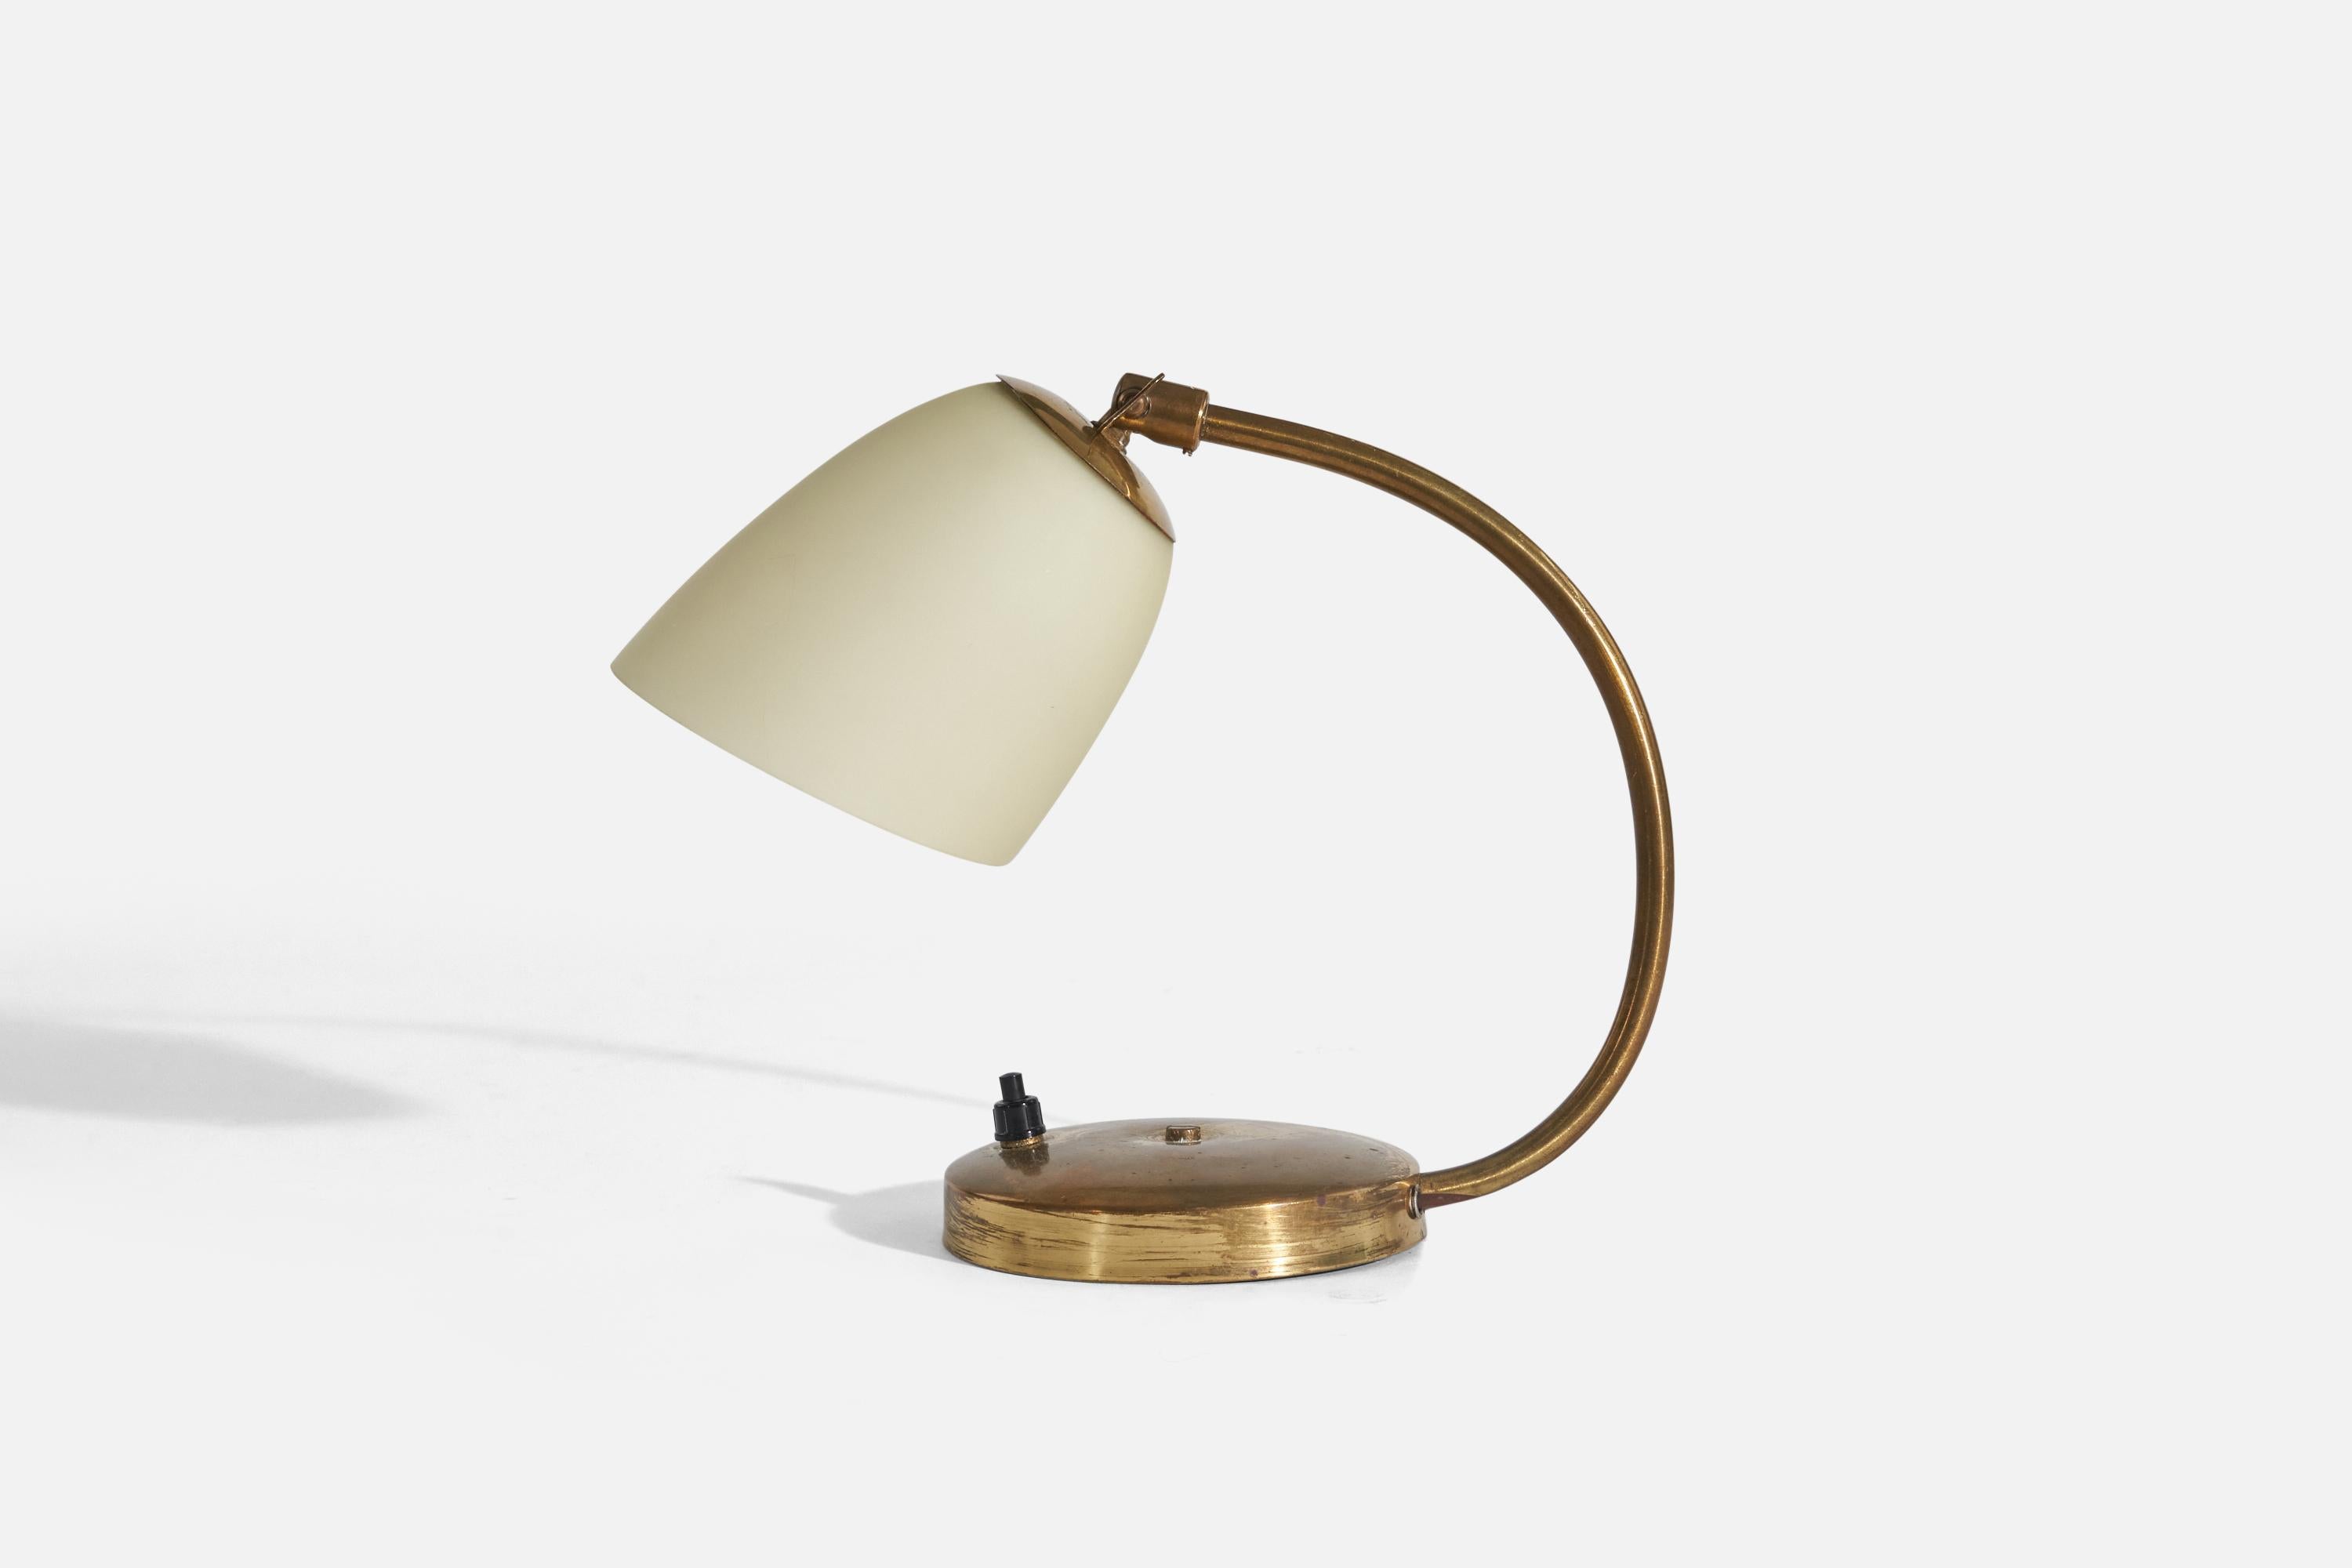 A brass and milk glass table lamp designed and produced in Sweden, 1930s.

Variable dimensions, measured as illustrated in the first image.

Socket takes standard E-26 medium base bulb.
There is no maximum wattage stated on the fixture.